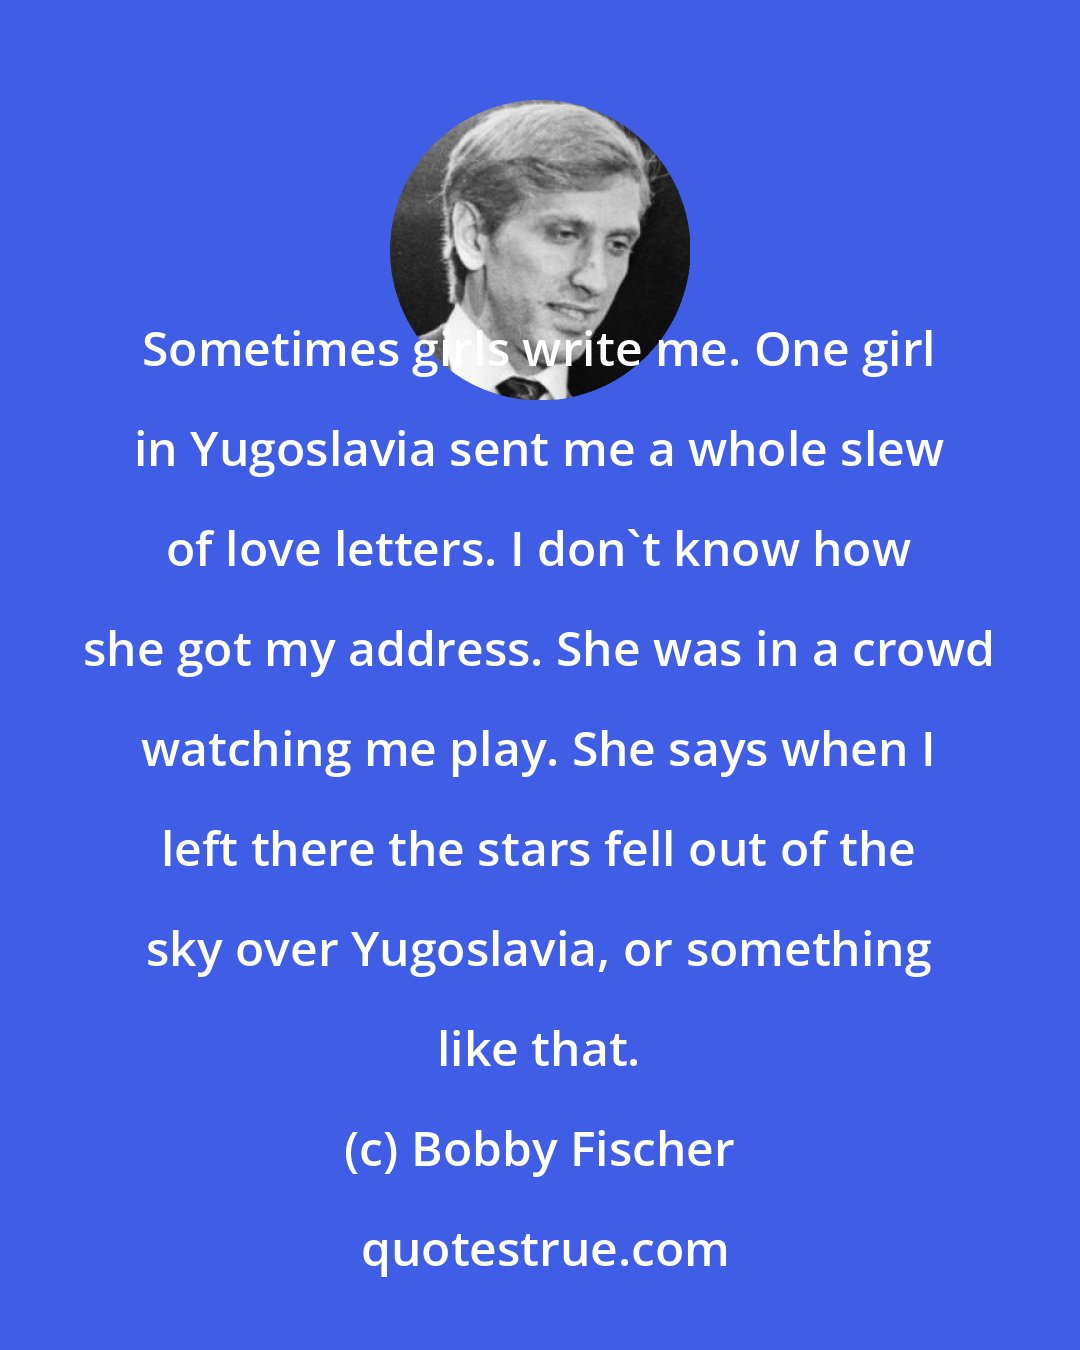 Bobby Fischer: Sometimes girls write me. One girl in Yugoslavia sent me a whole slew of love letters. I don't know how she got my address. She was in a crowd watching me play. She says when I left there the stars fell out of the sky over Yugoslavia, or something like that.